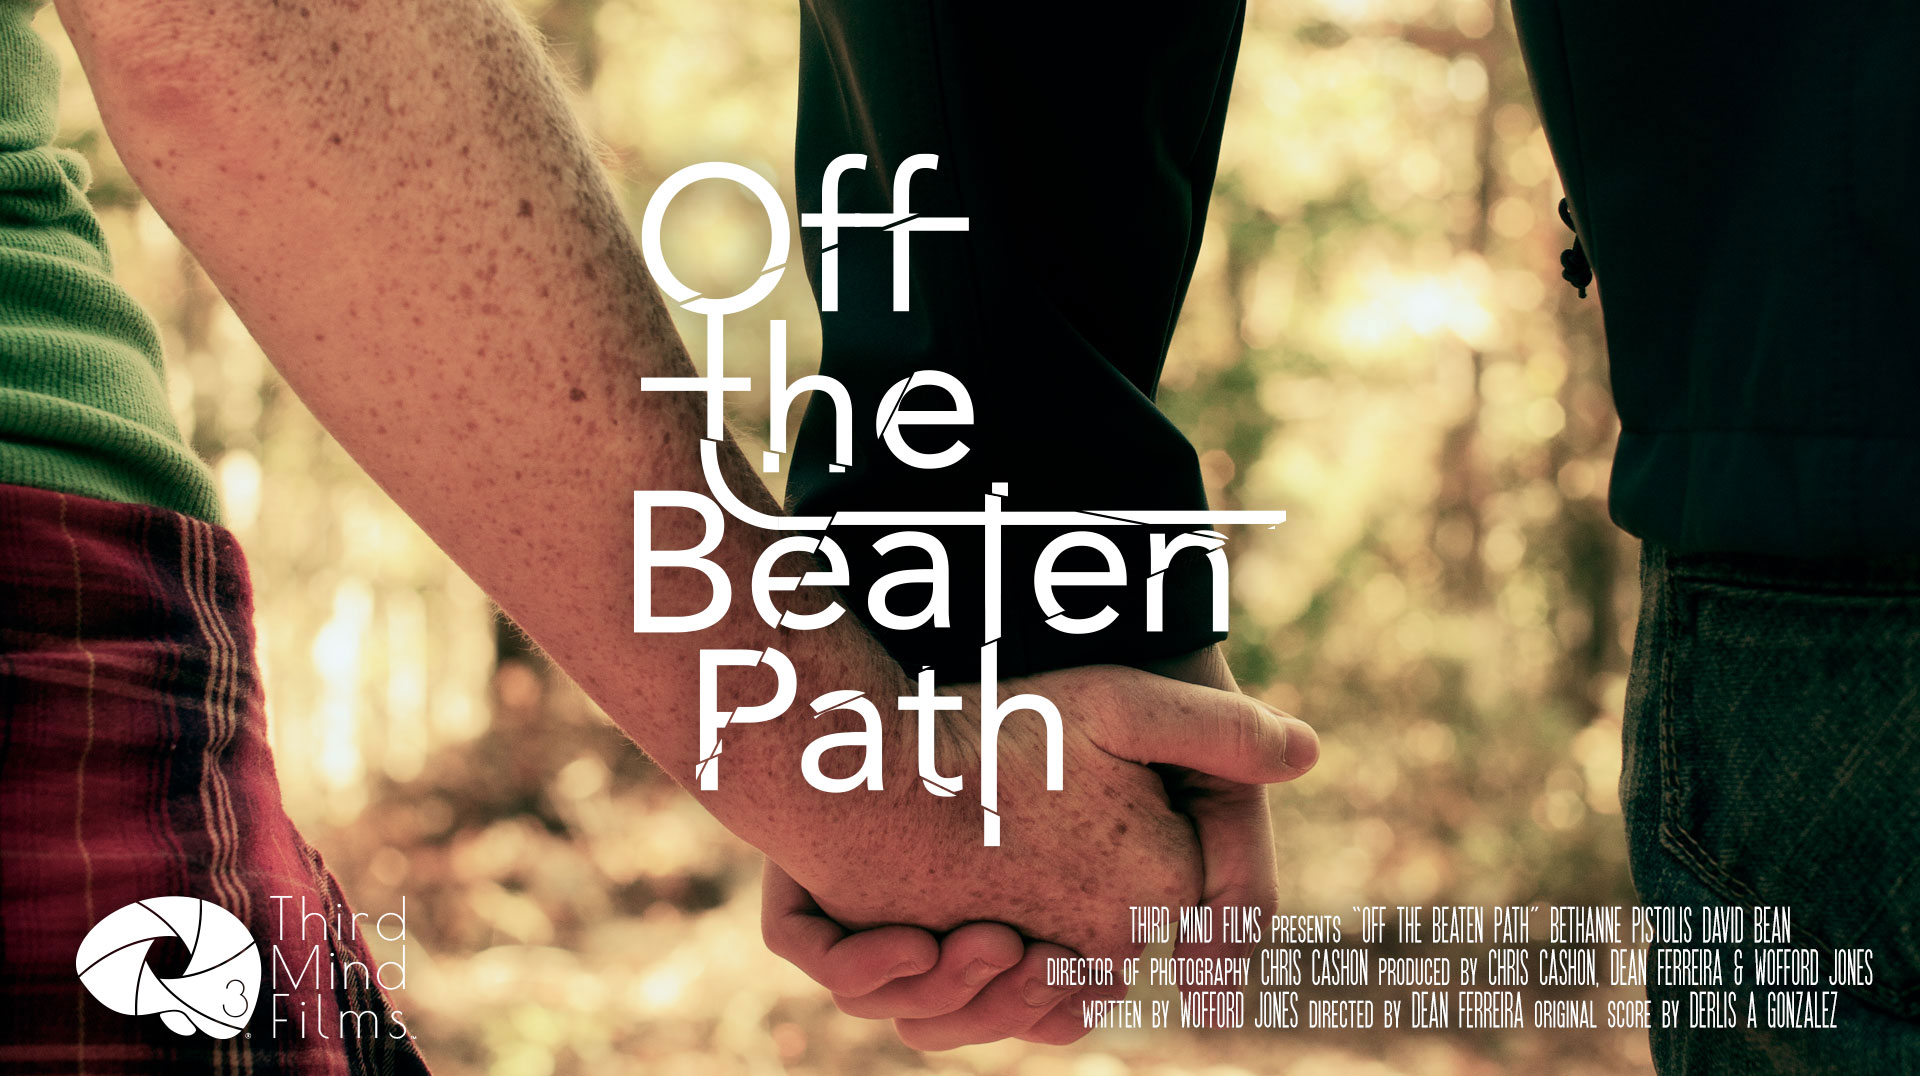 News about Off the Beaten Path | Off the Beaten Path